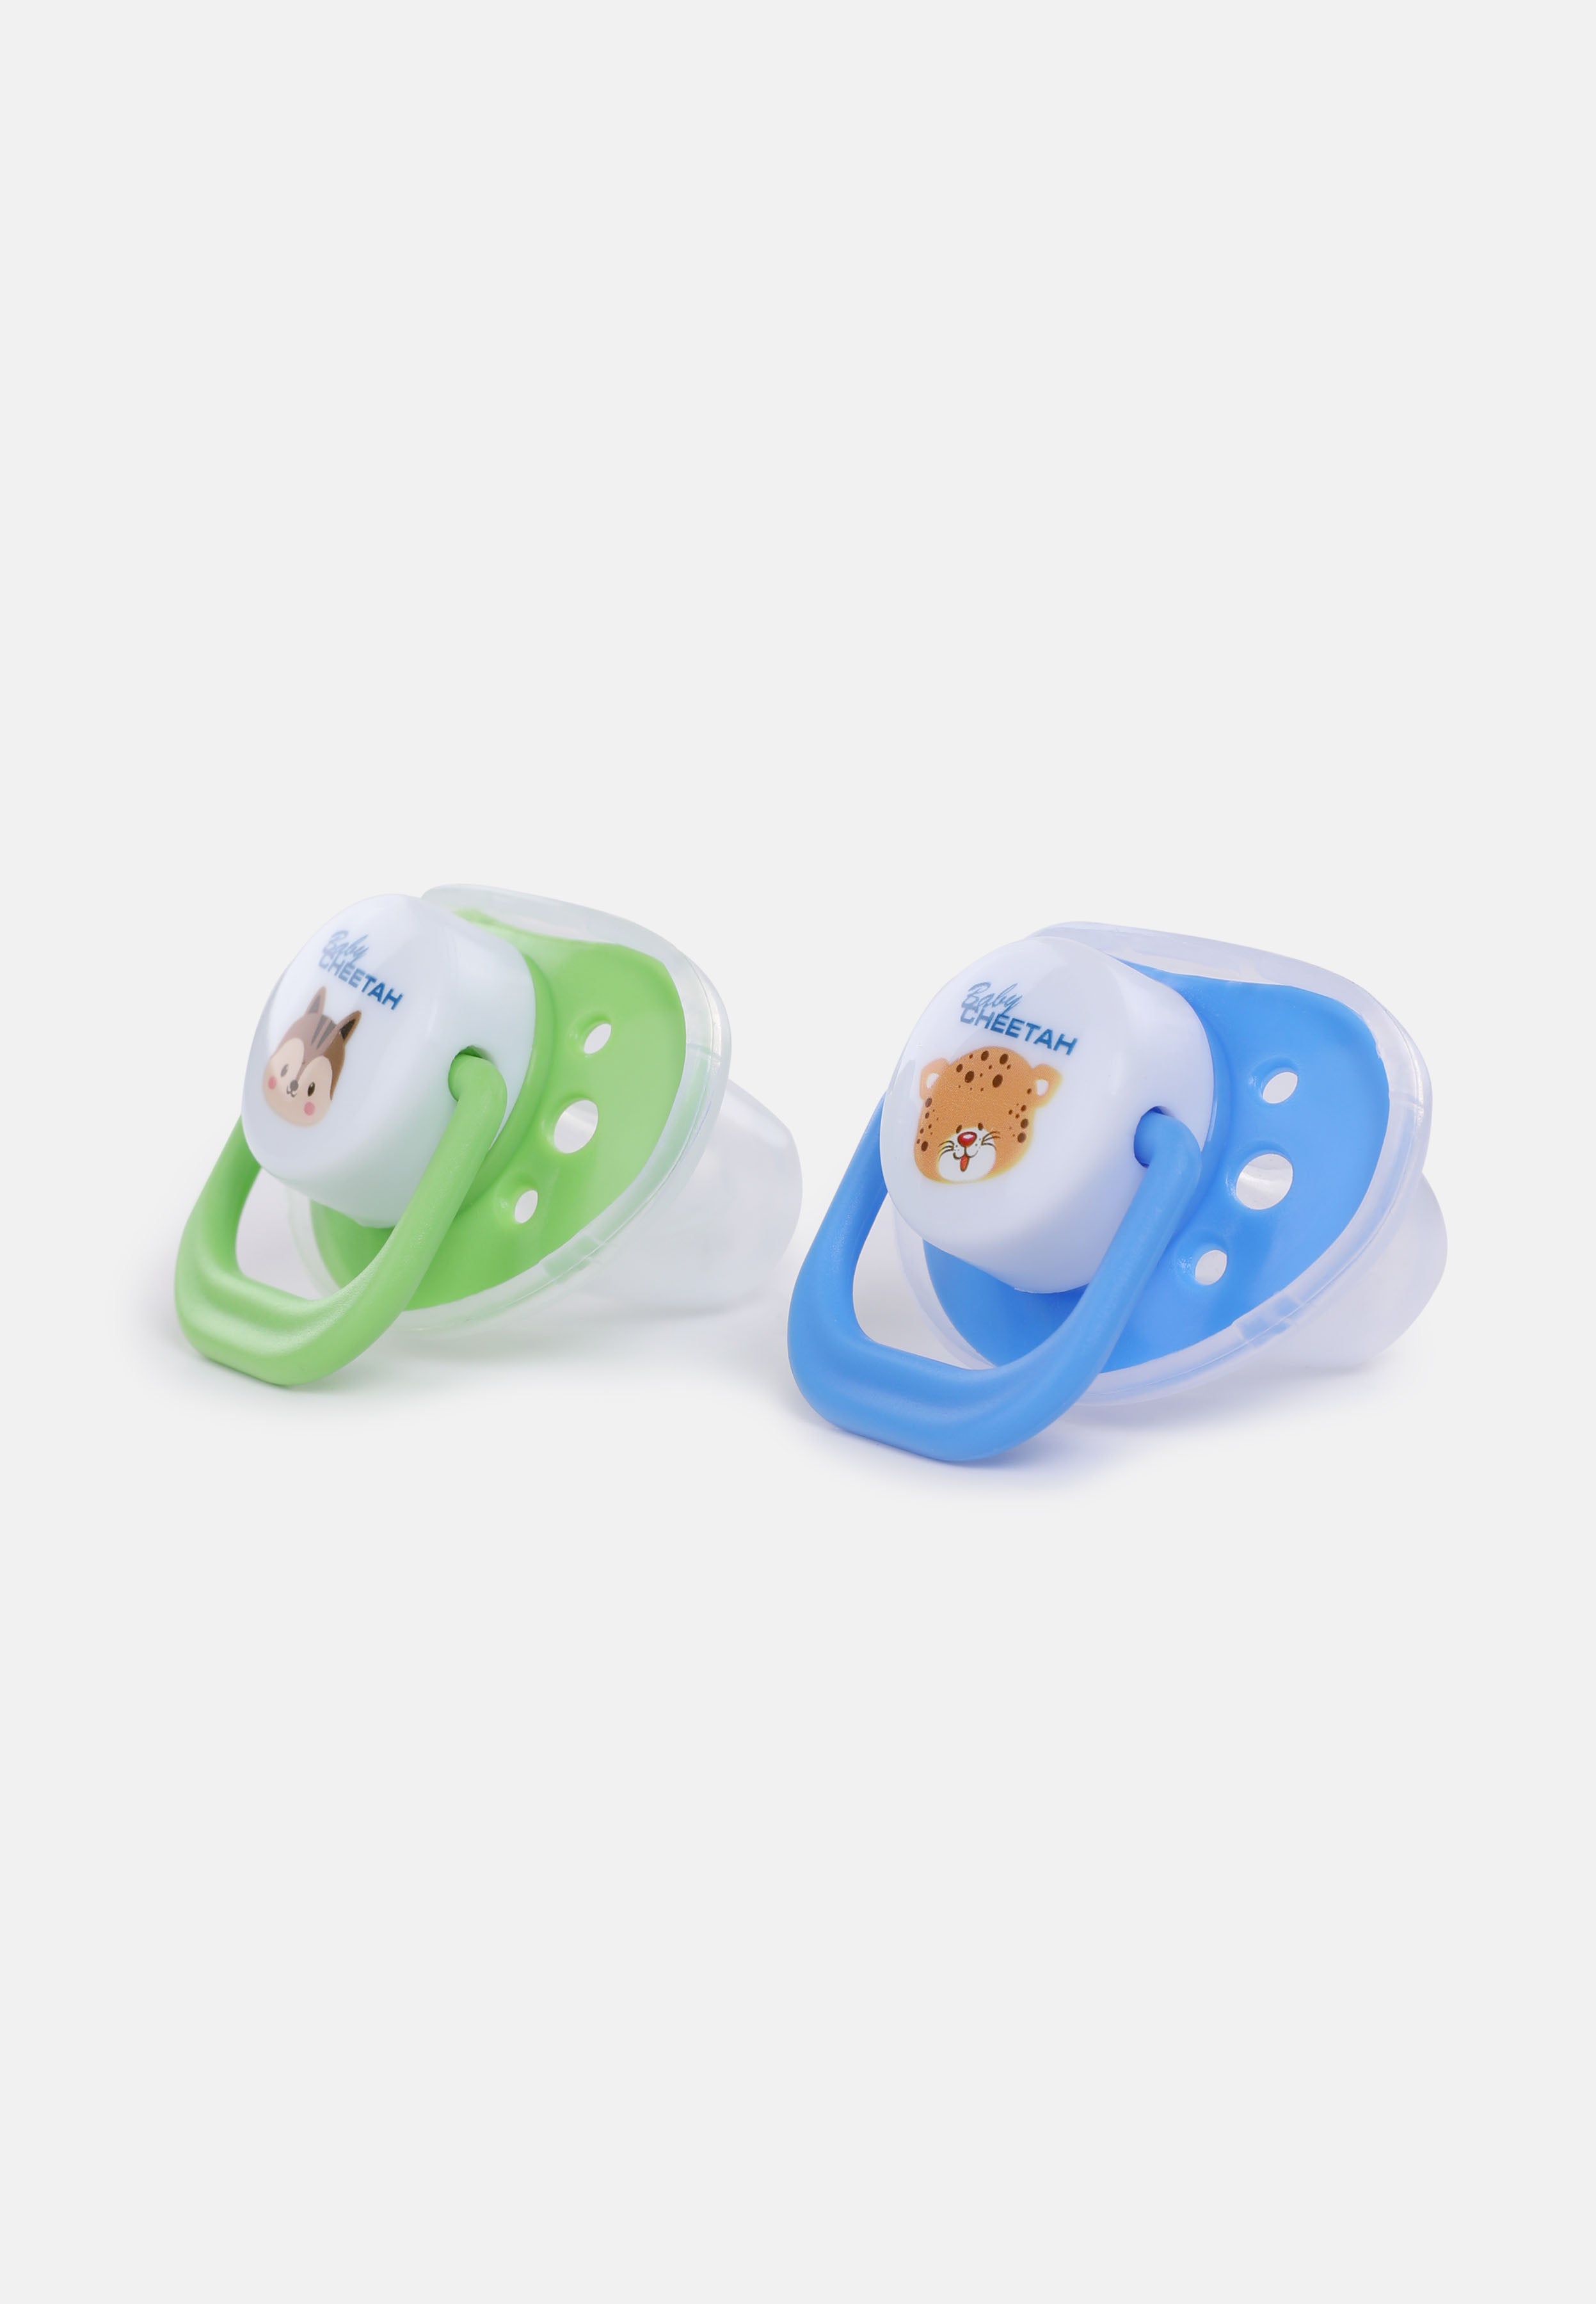 Baby Cheetah Soother with Case (2 IN 1) - Orthodontic Teats (6M+) - CBB-ST21112